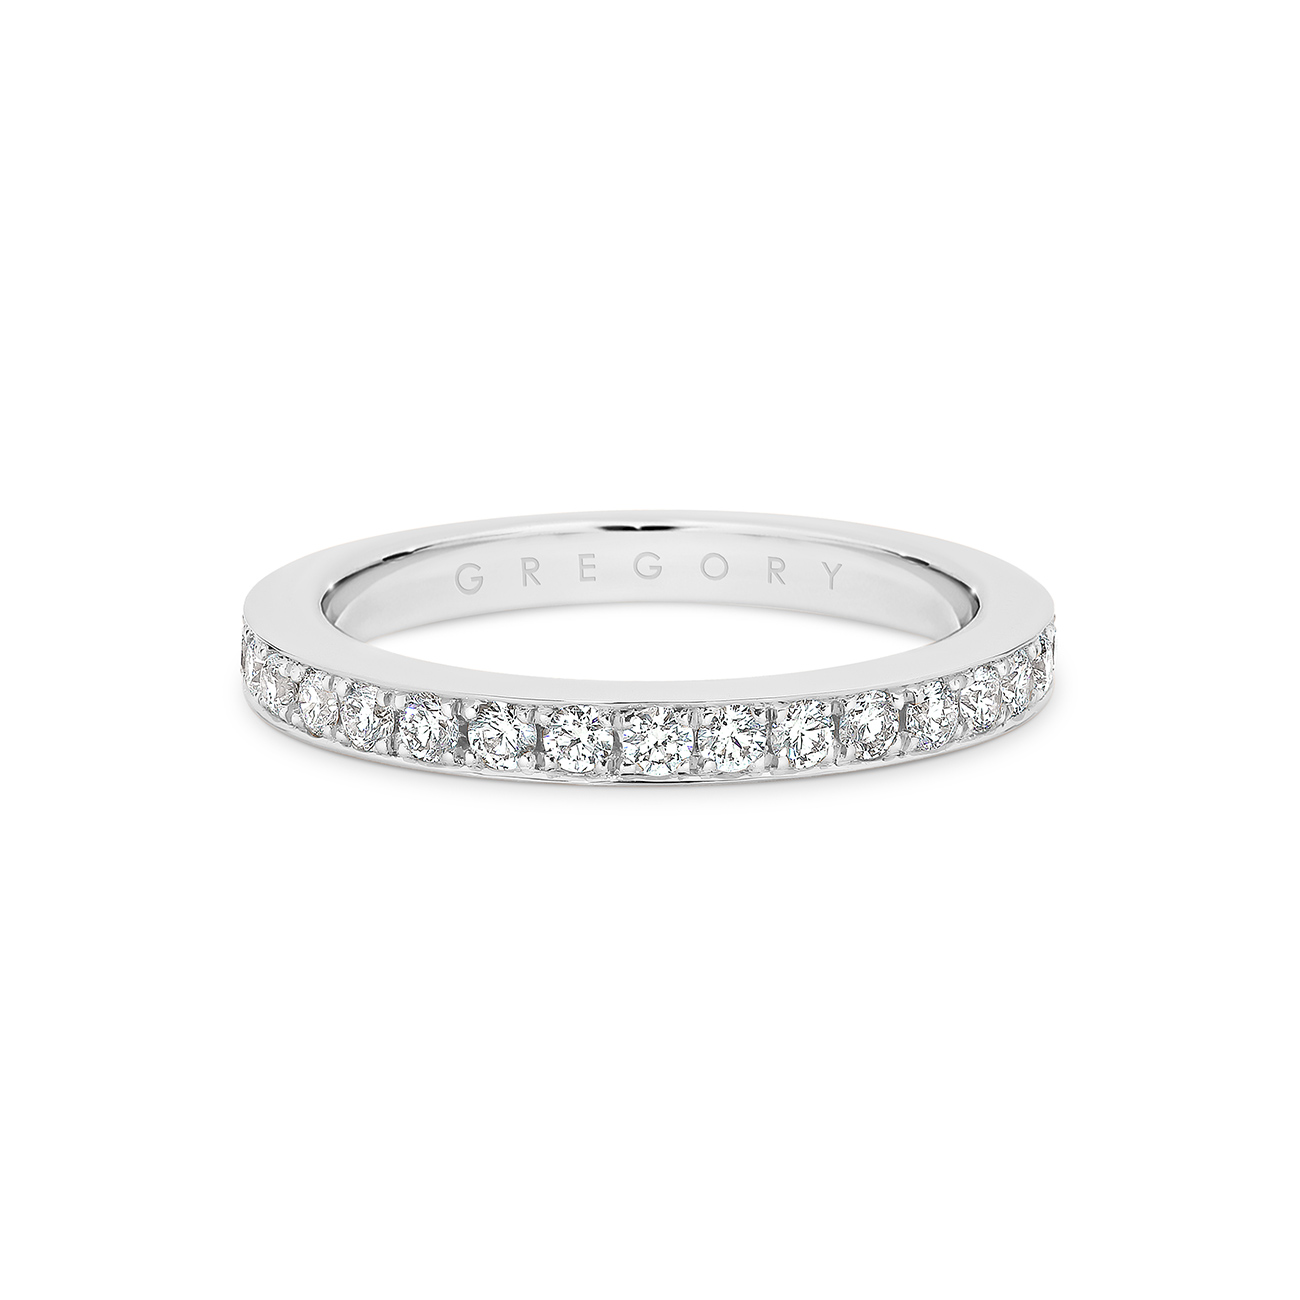 Classic Pave Set Diamond Band in White Gold